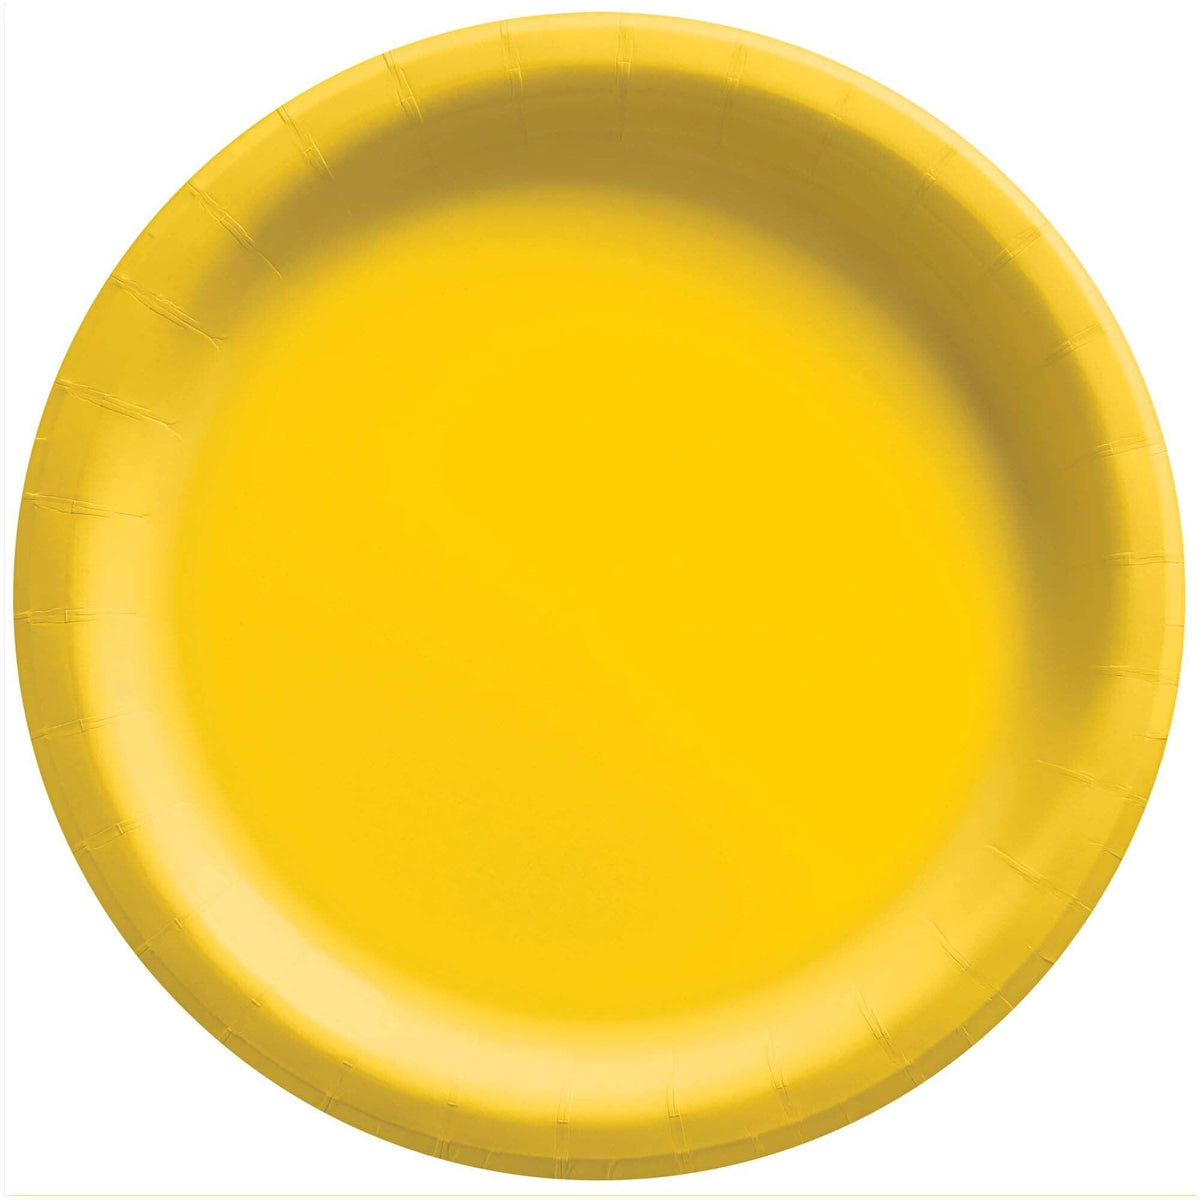 AMSCAN CA Disposable-Plasticware Yellow Sunshine Round Paper Plates, 7 Inches, 20 Count 192937241387